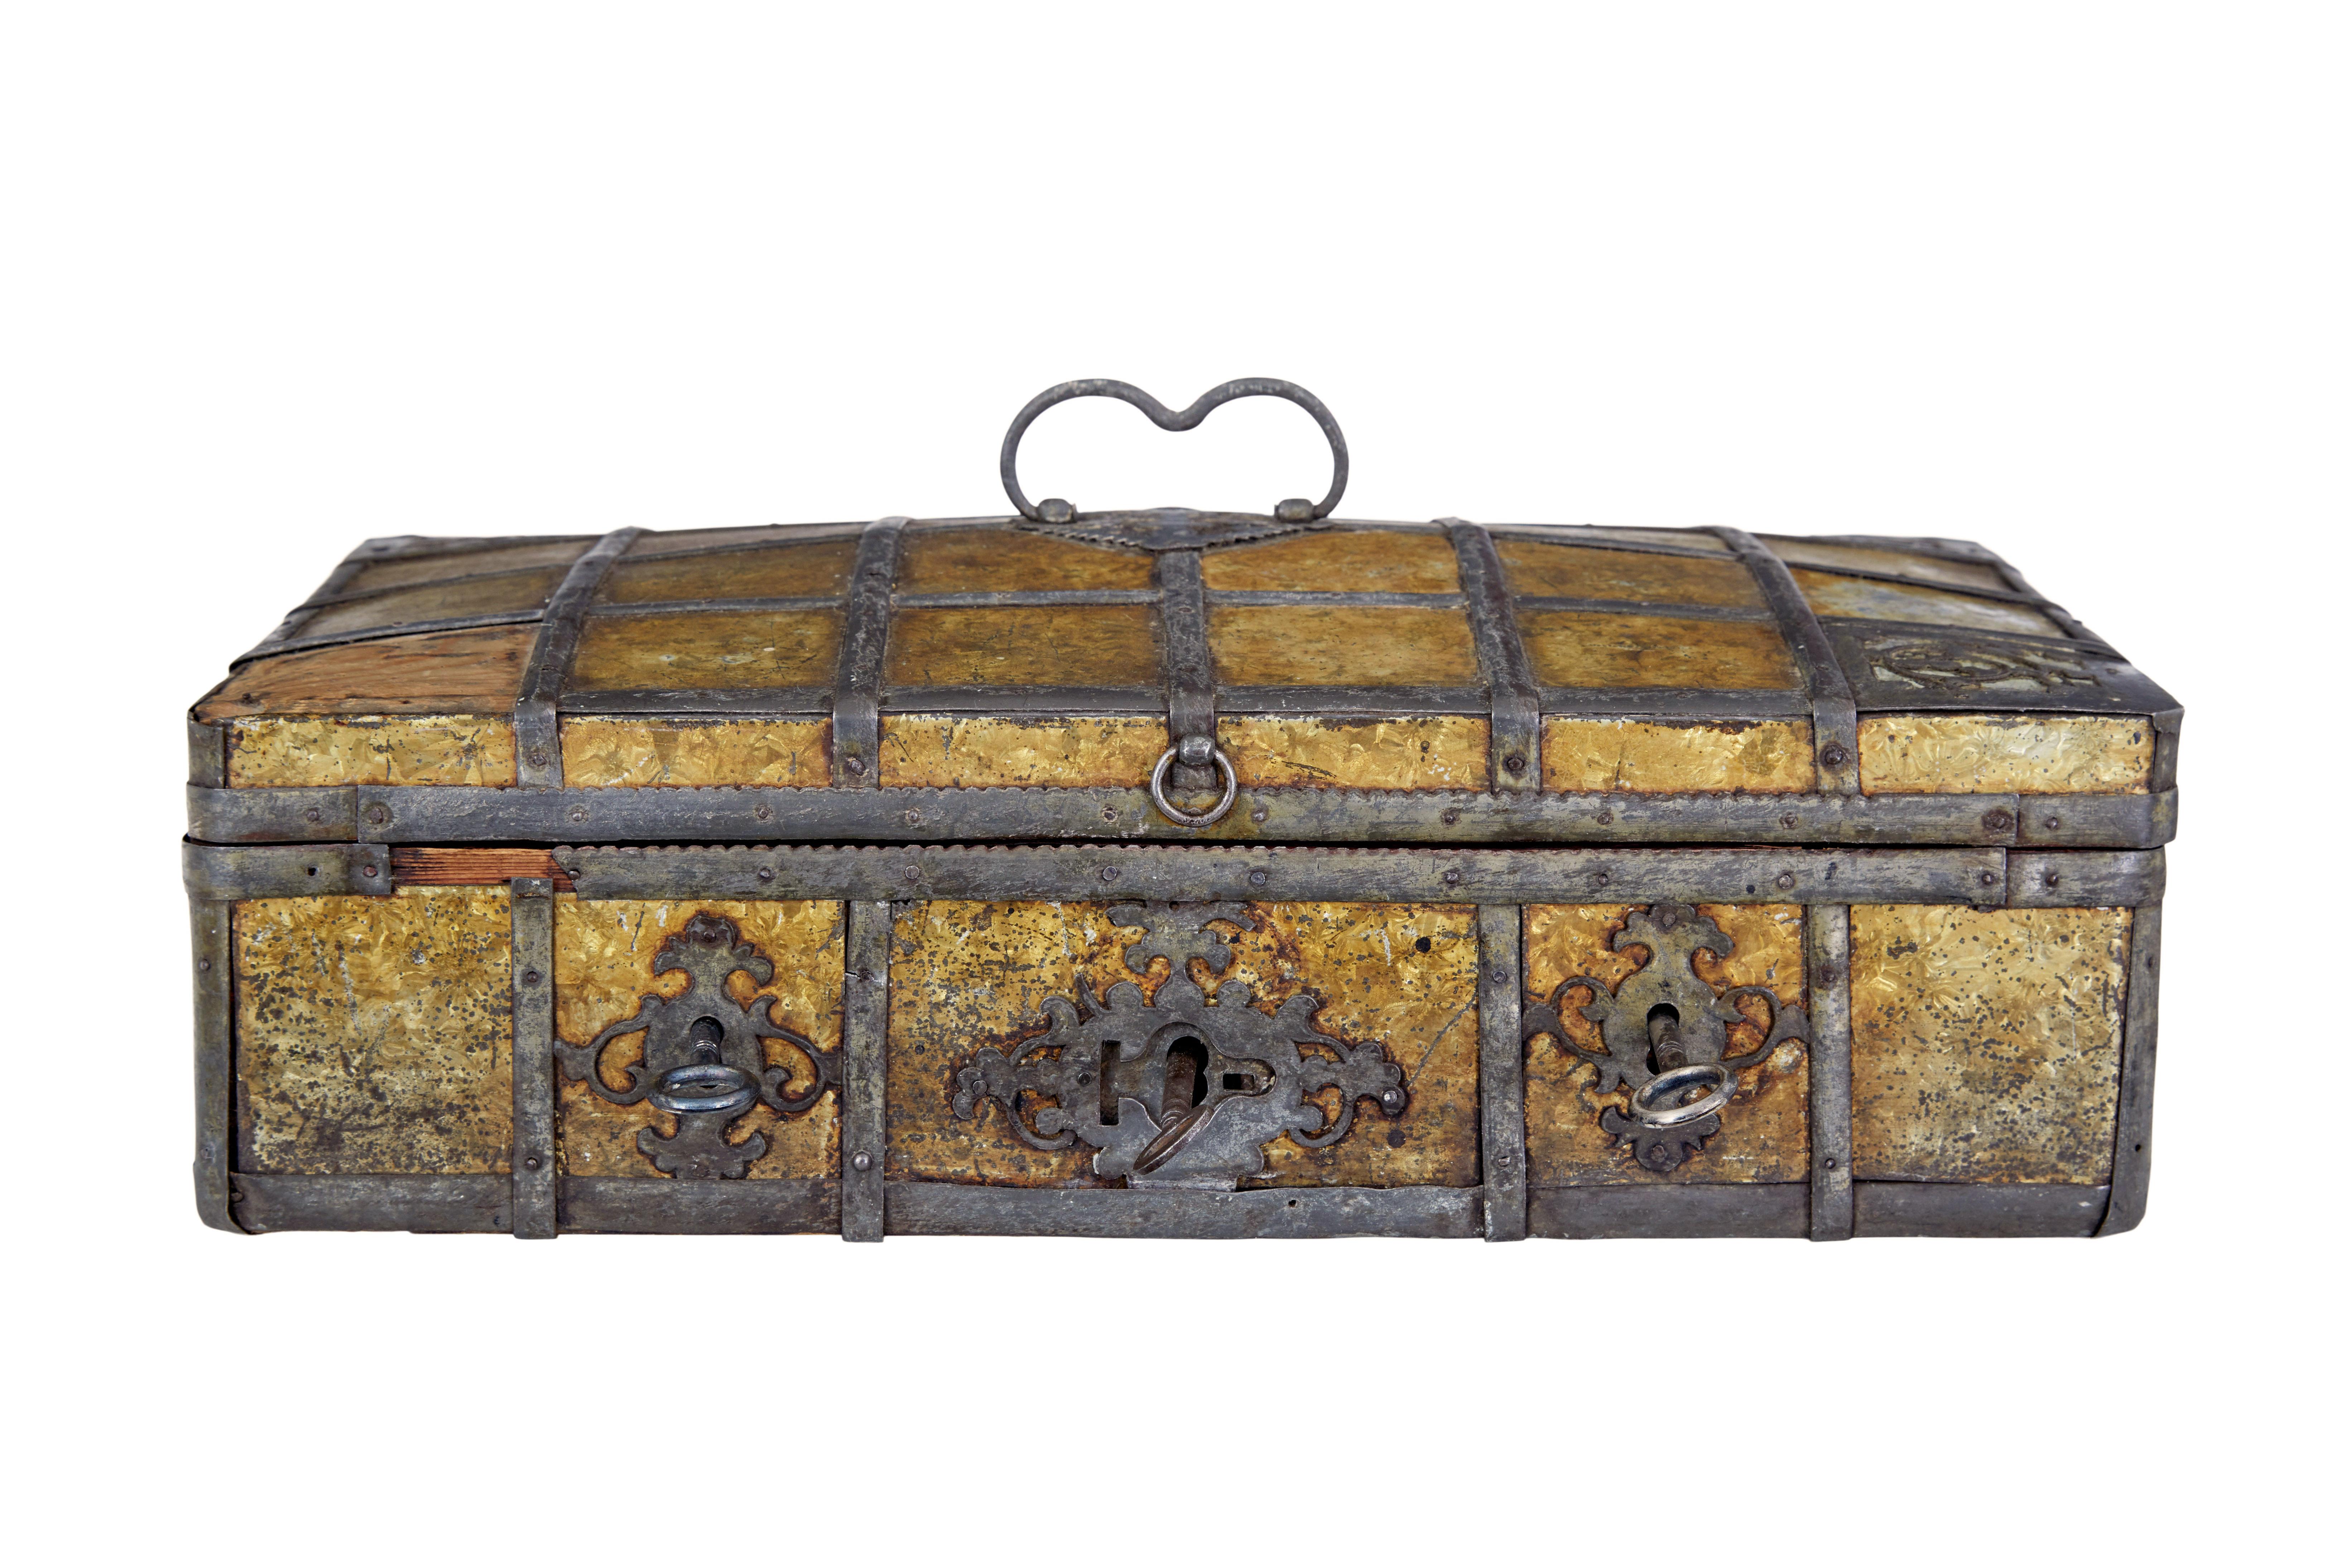 Late 18th century scandinavian metal bound box circa 1790.

Rare baroque inspired strong box with 3 locks on the front.  Quite likely to have been a box of some importance during it's early life, being fitted with 3 locks which would have meant